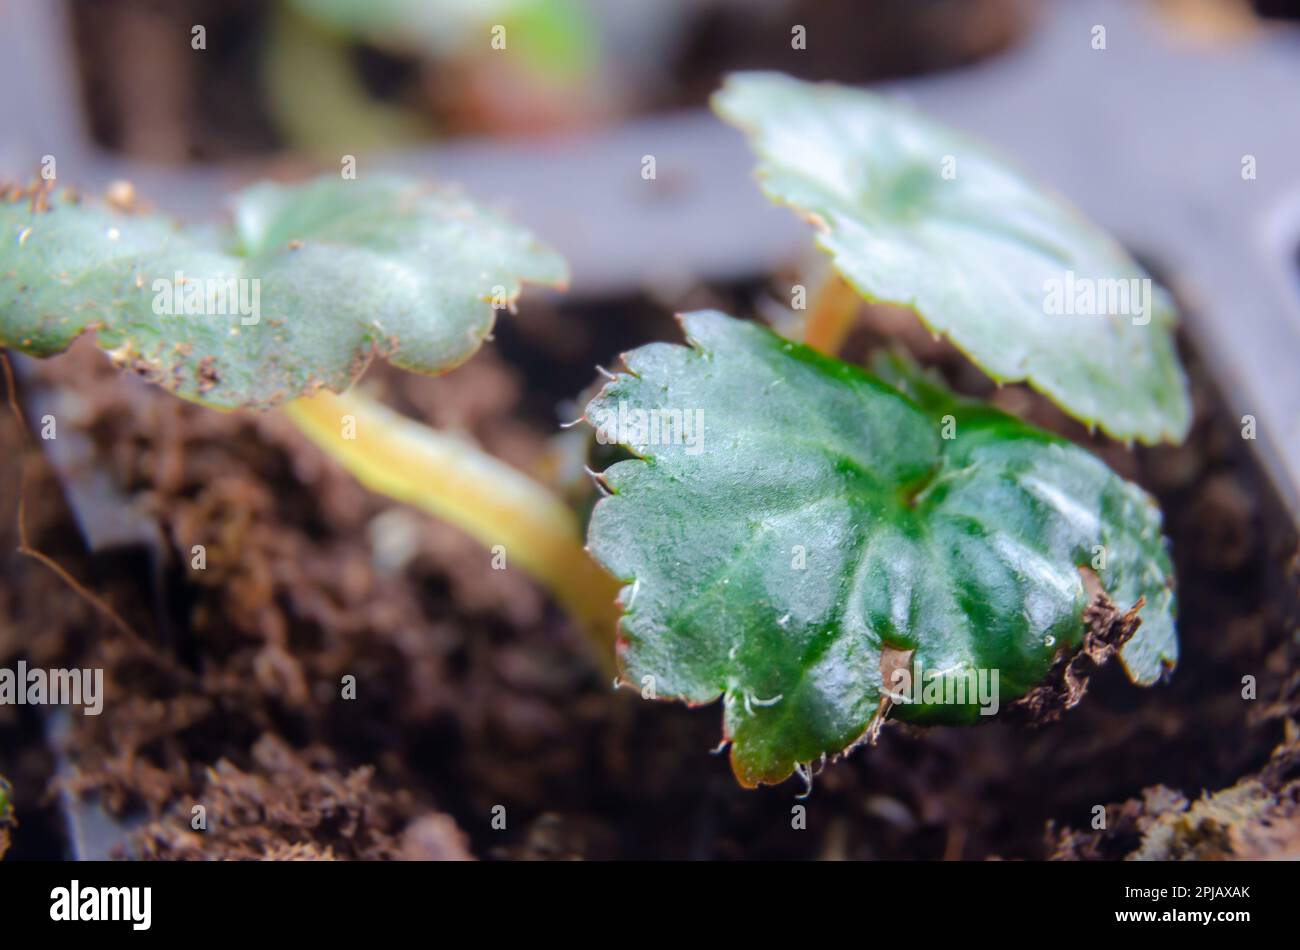 Close up view of begonia seedlings growing in a seed tray Stock Photo